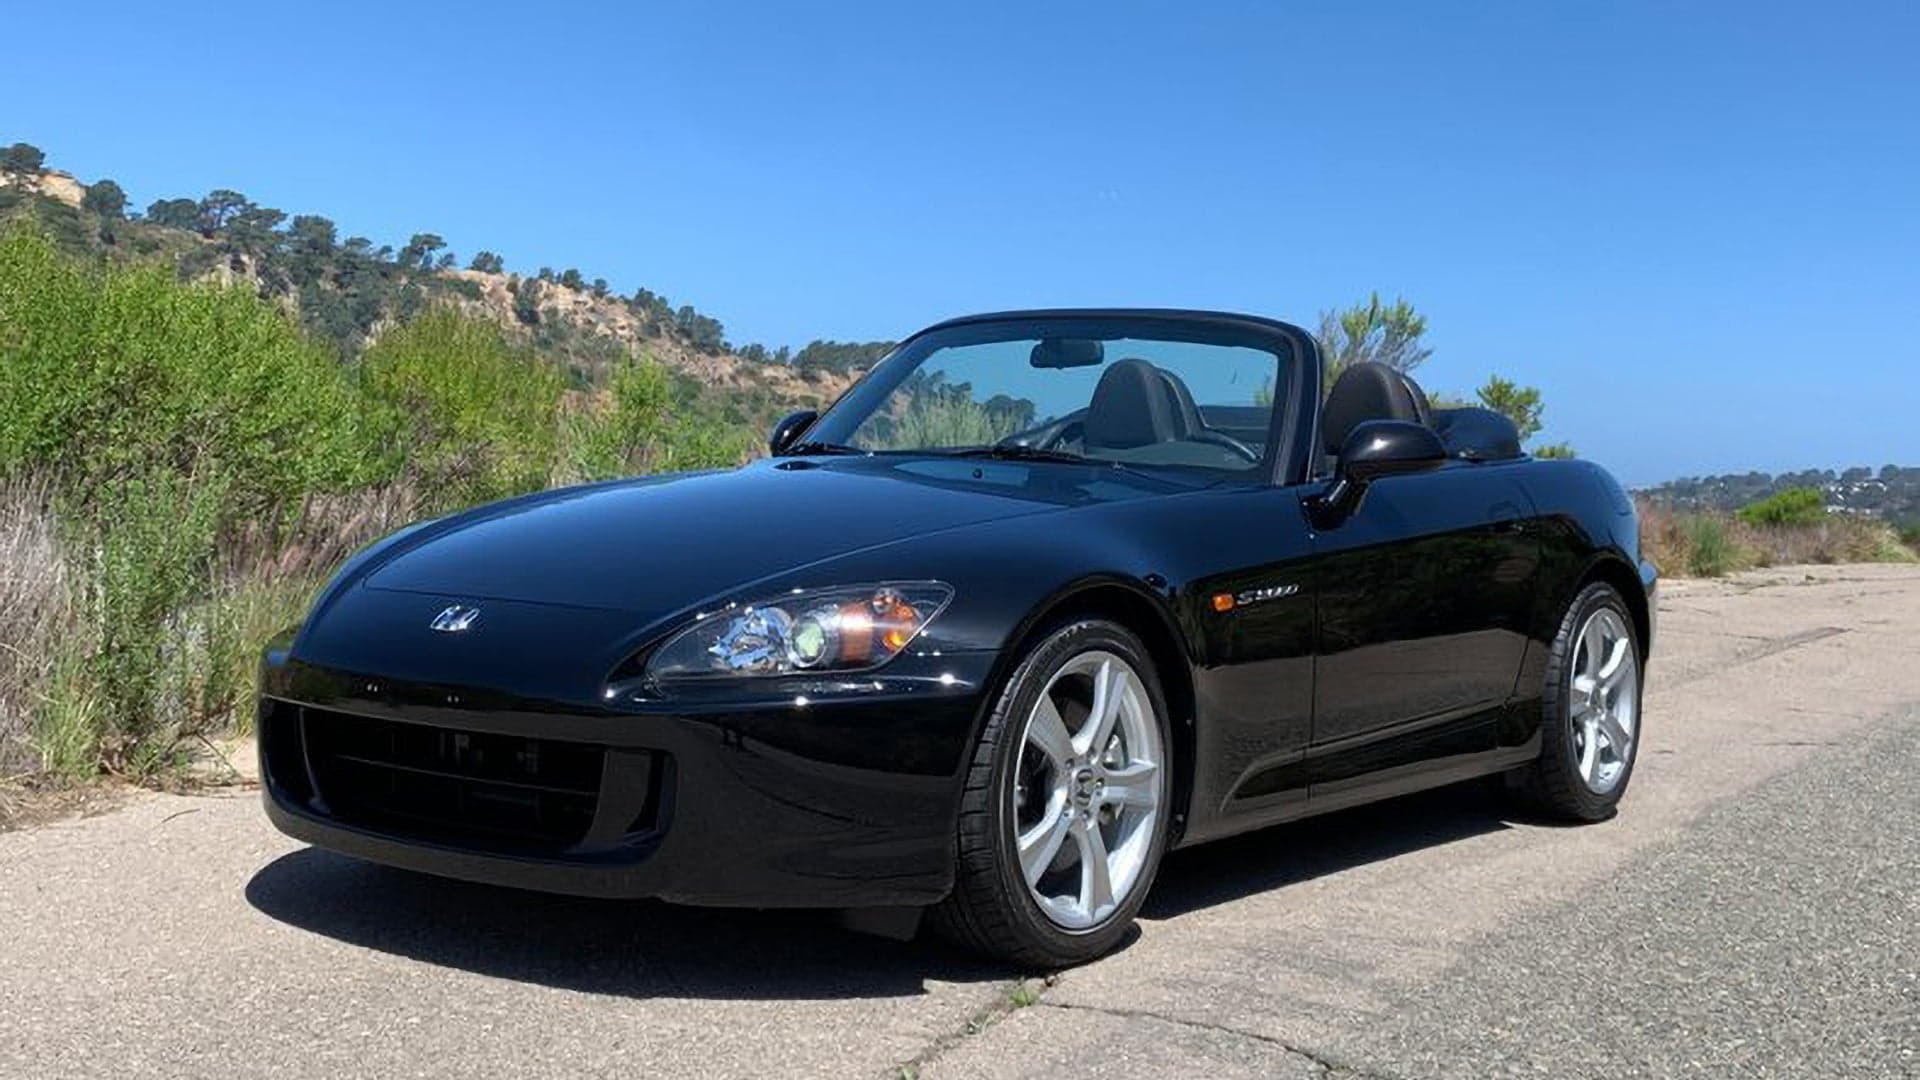 This Never-Titled 2009 Honda S2000 With Only 95 Miles Can Be Yours for $100,000